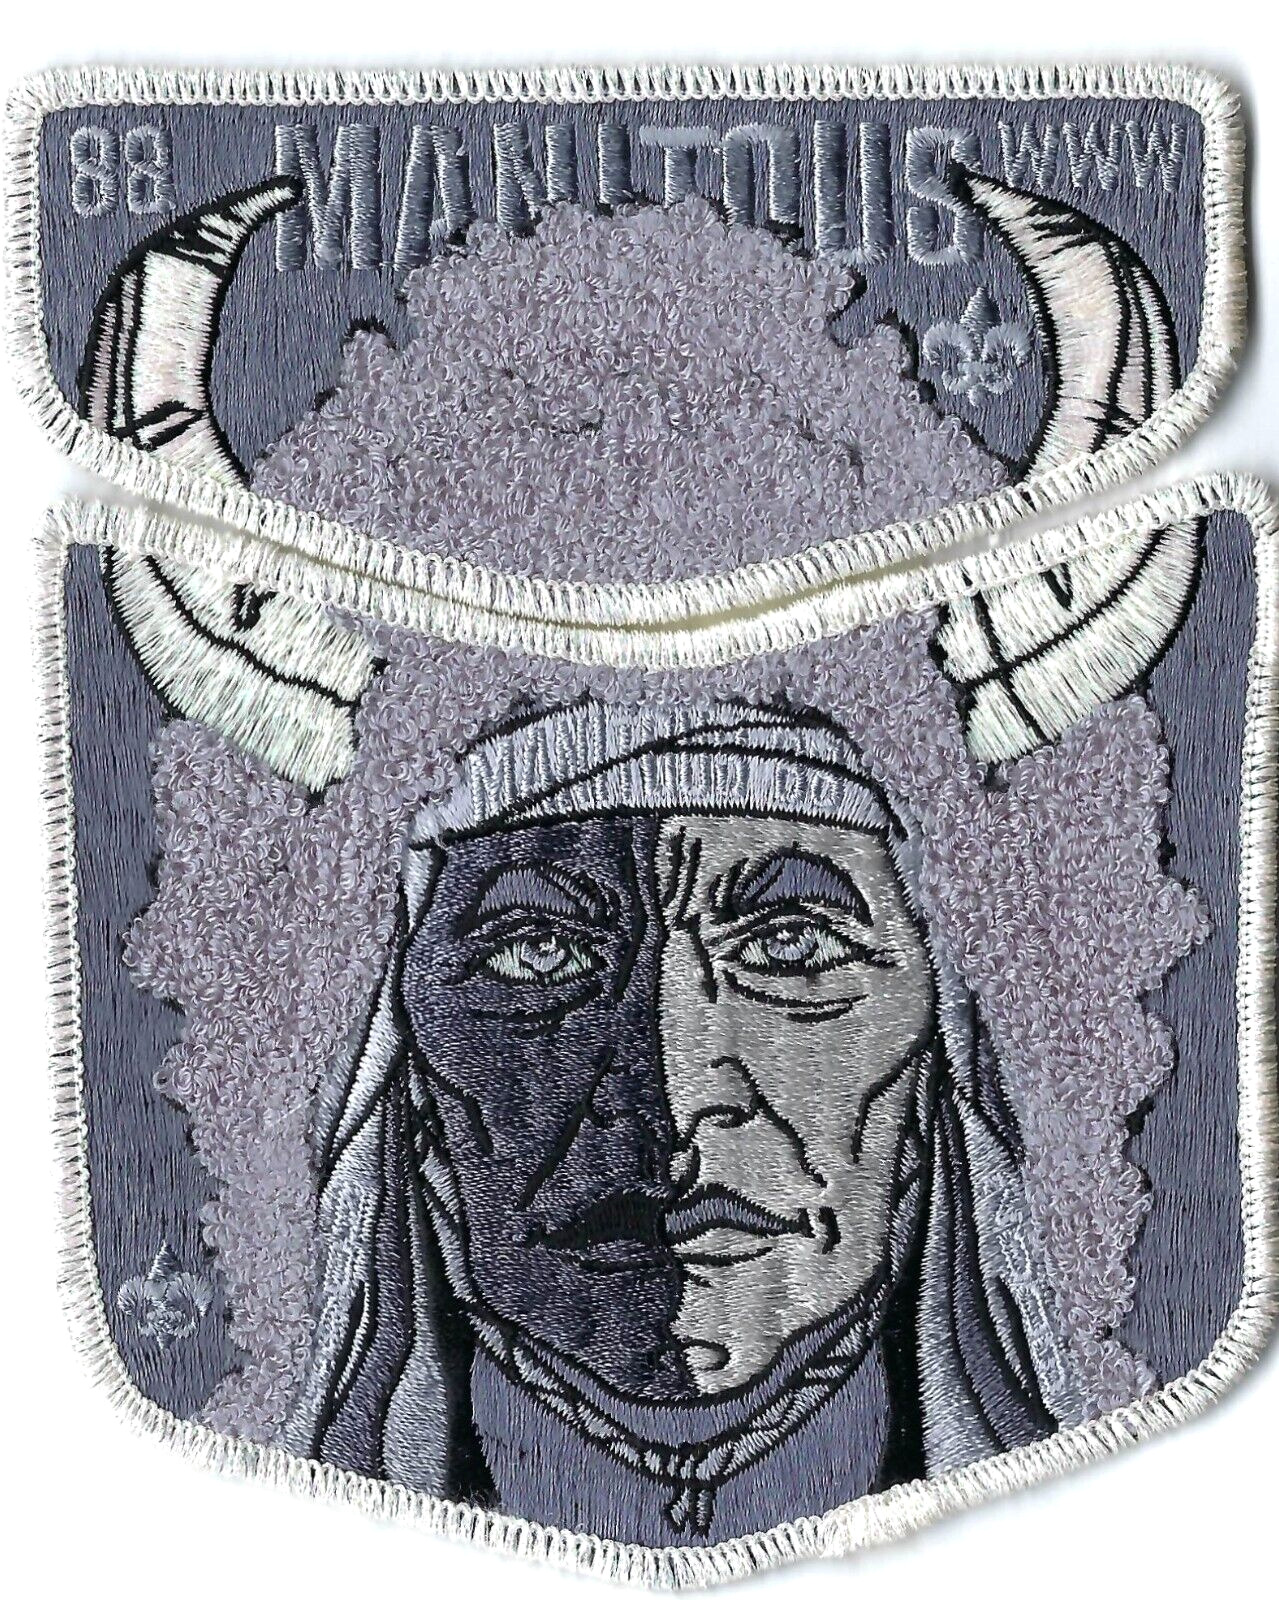 NOAC Manitous Lodge 88 OA Flap Set 2009 Chenille with Iridescent Border n Horns